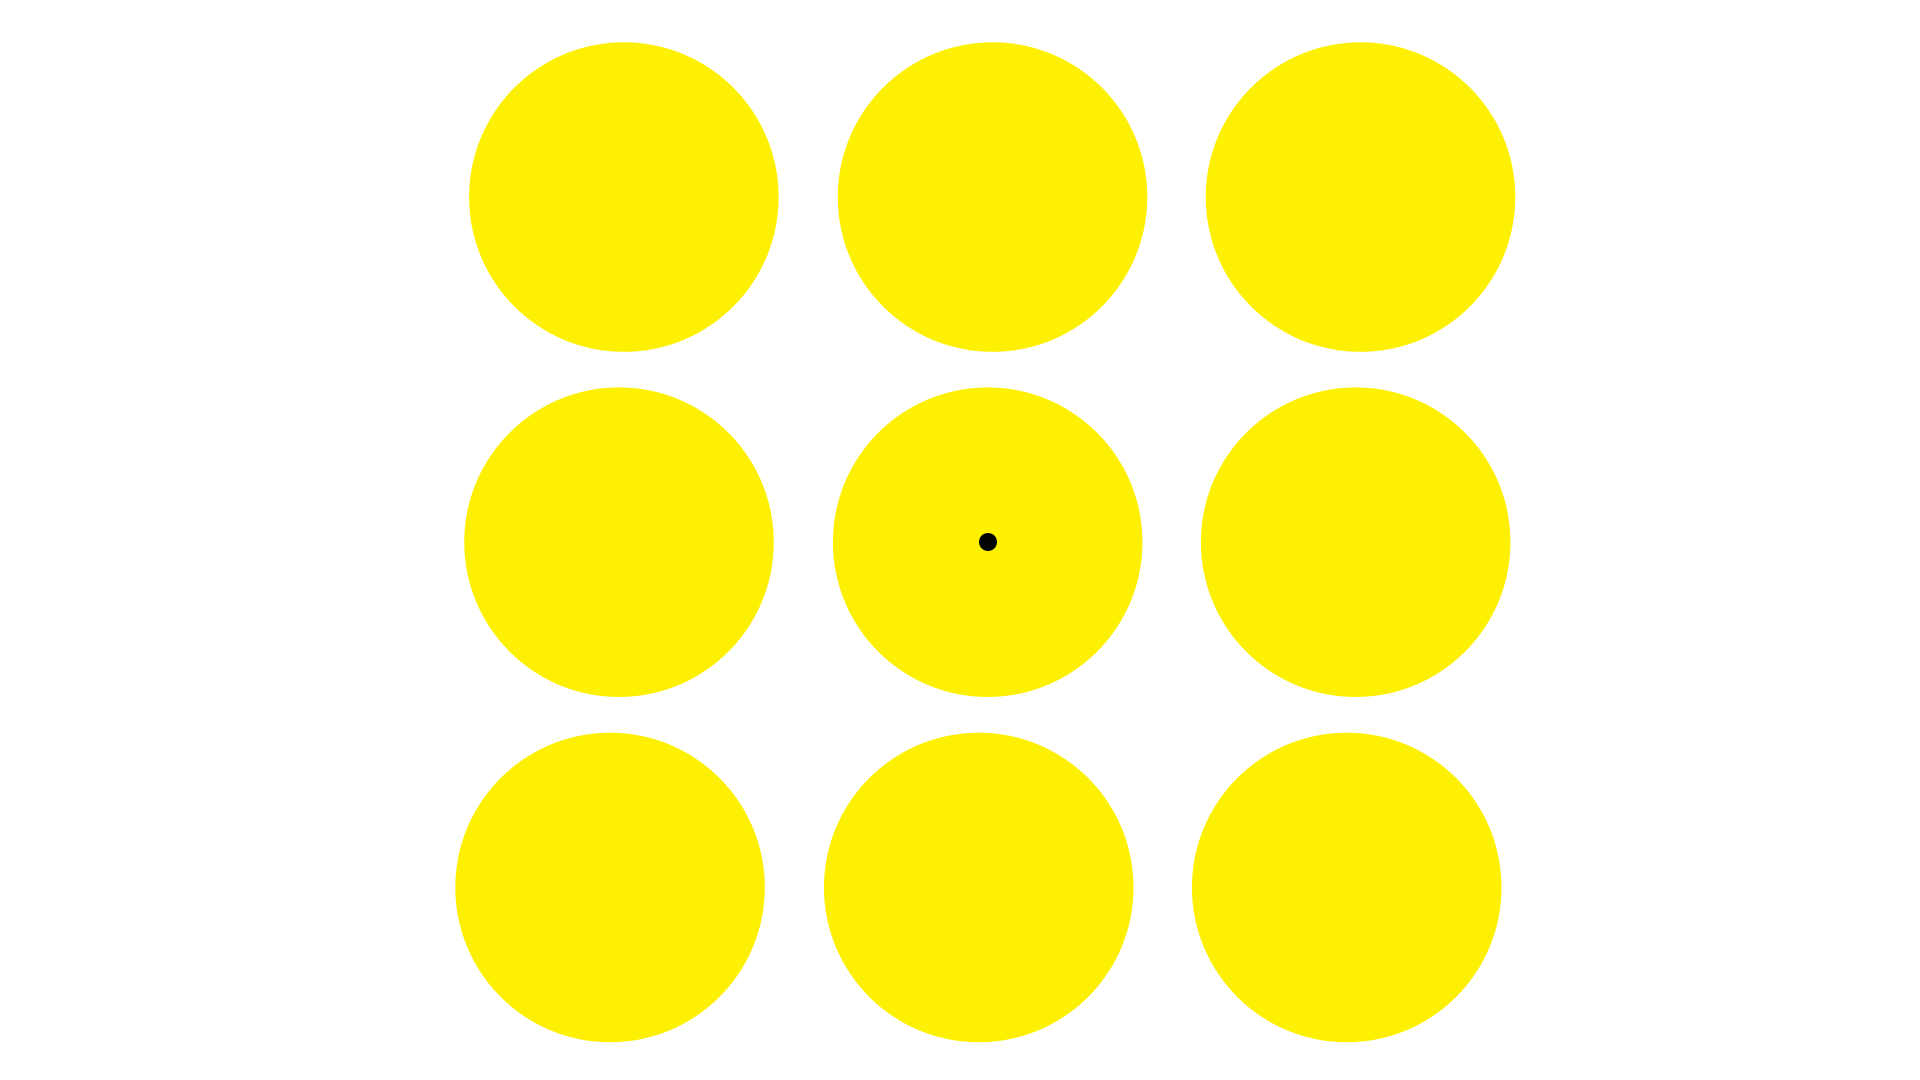 Nine Yellow Circles - an exercise in Simultaneous Contrast